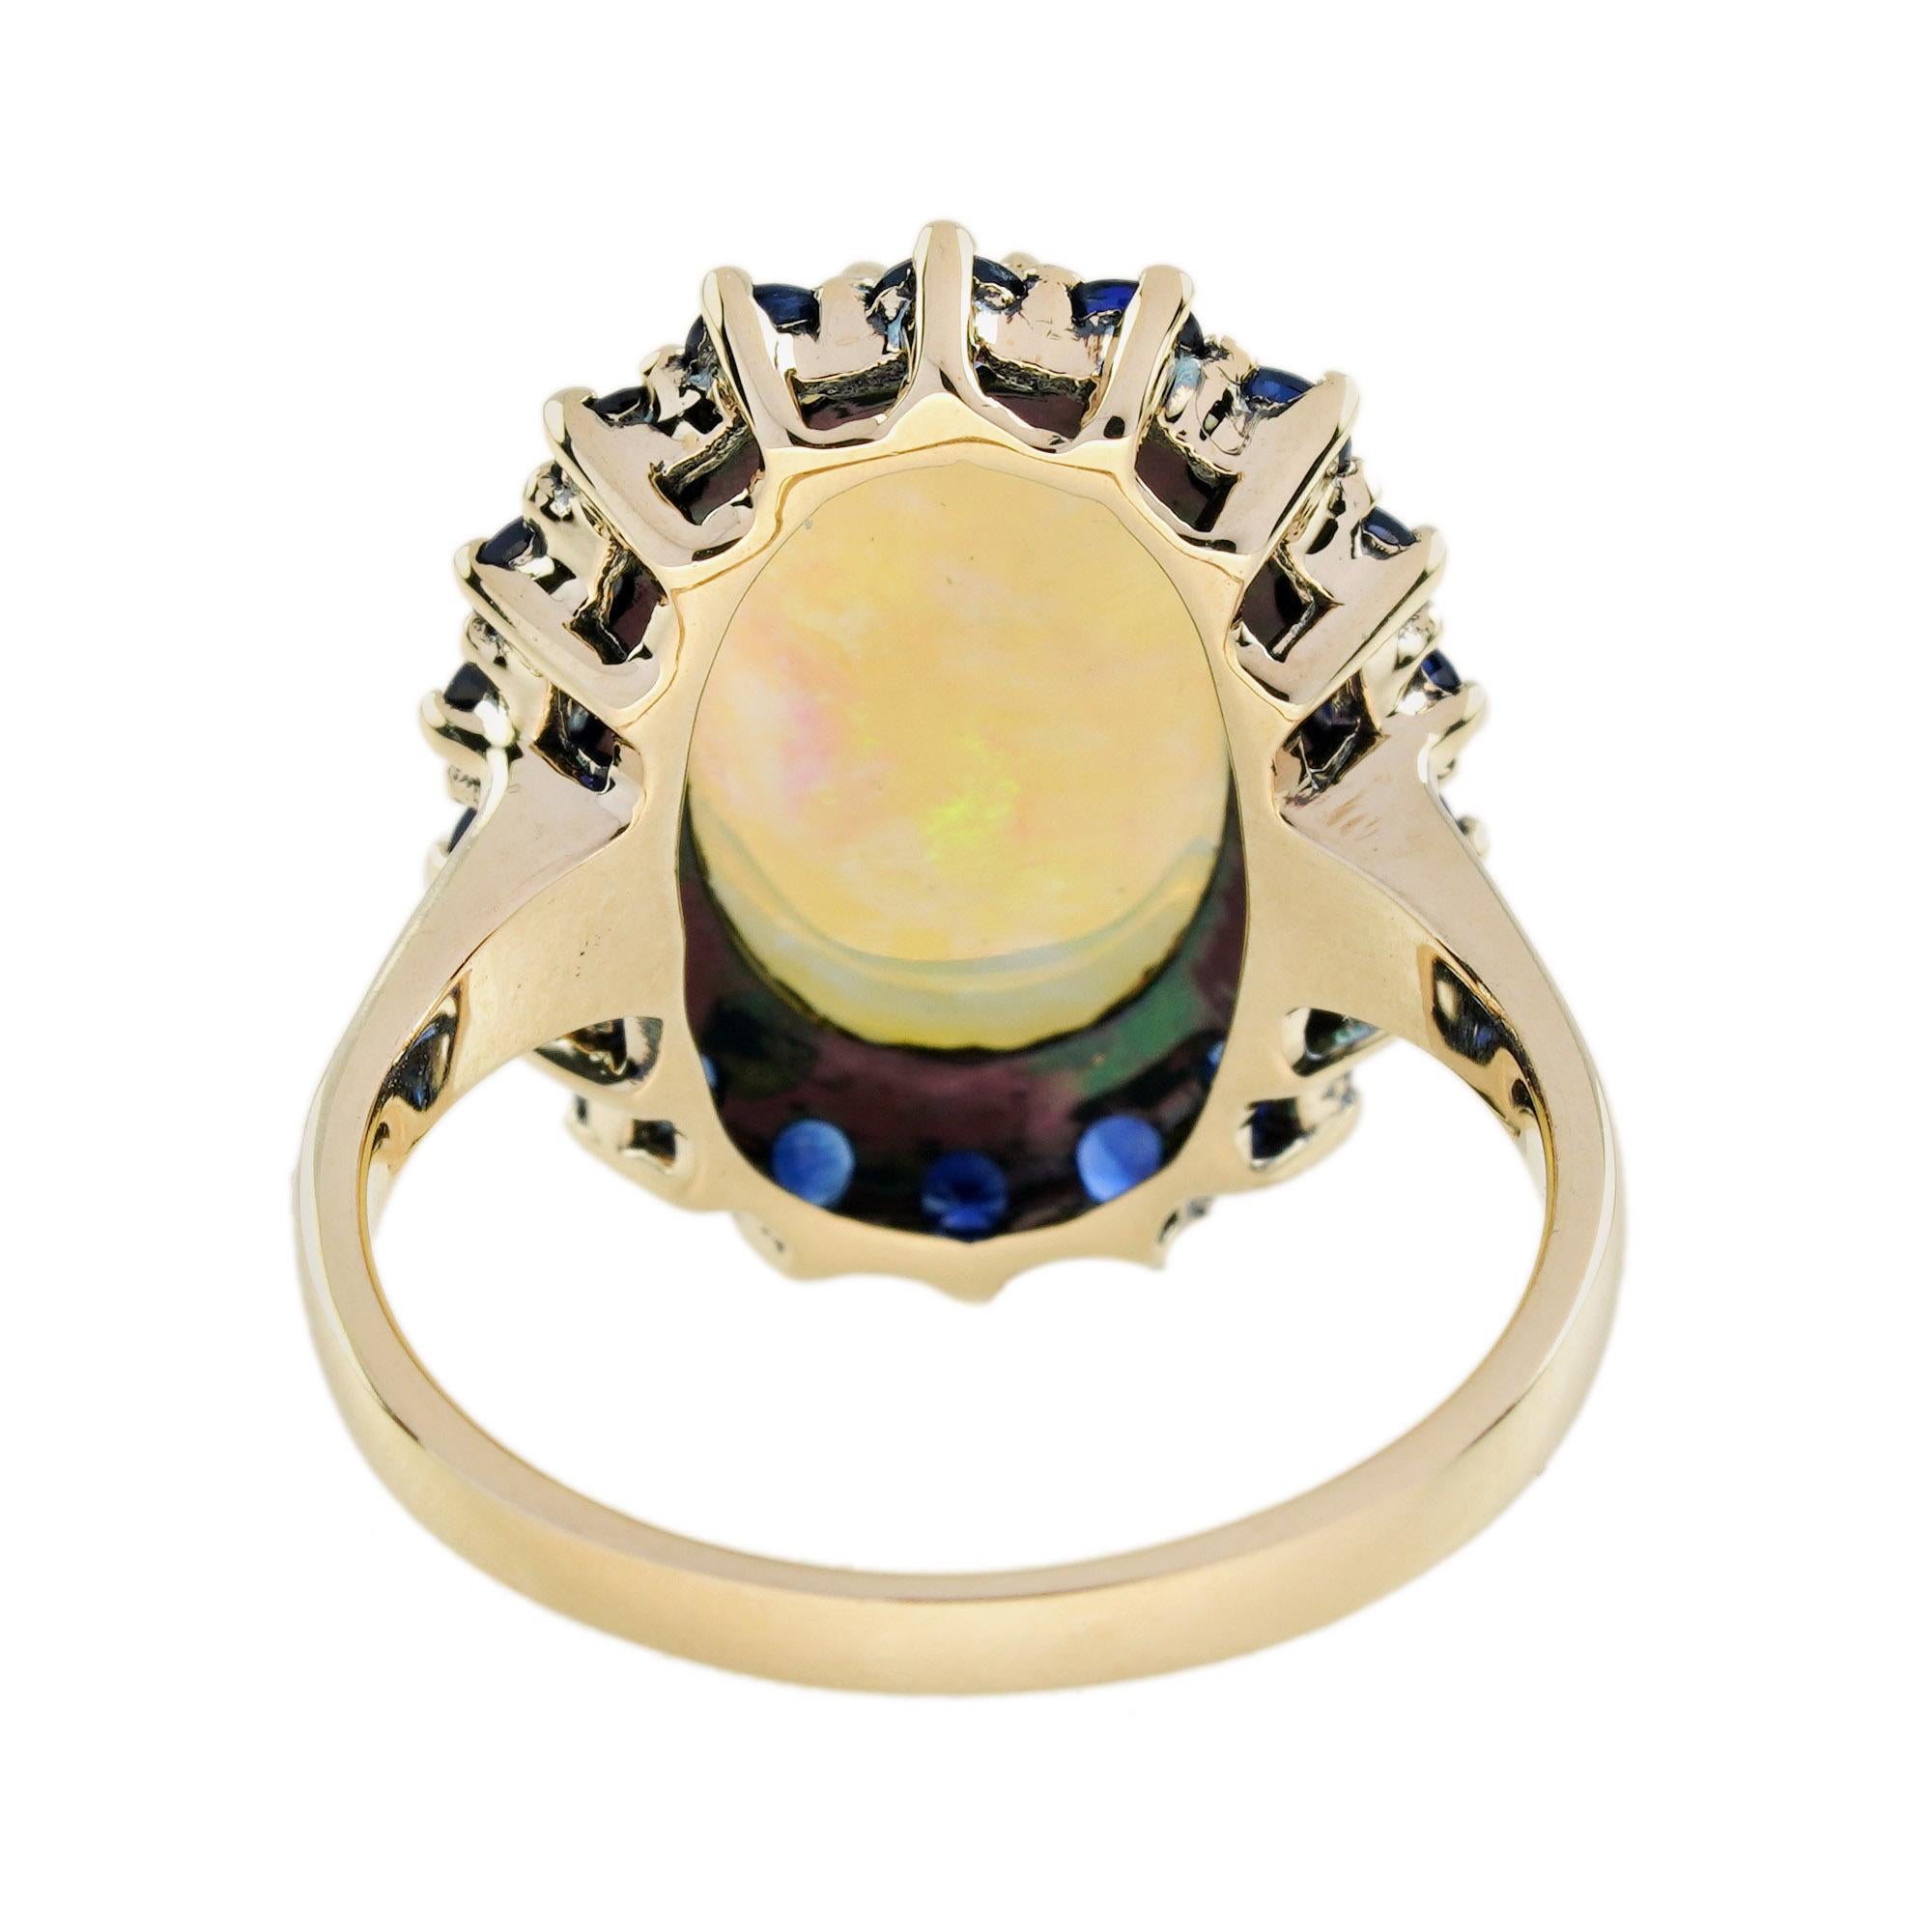 Oval Cut 3.43 Ct. Opal with Blue Sapphire Vintage Style Cocktail Ring in 9K Yellow Gold